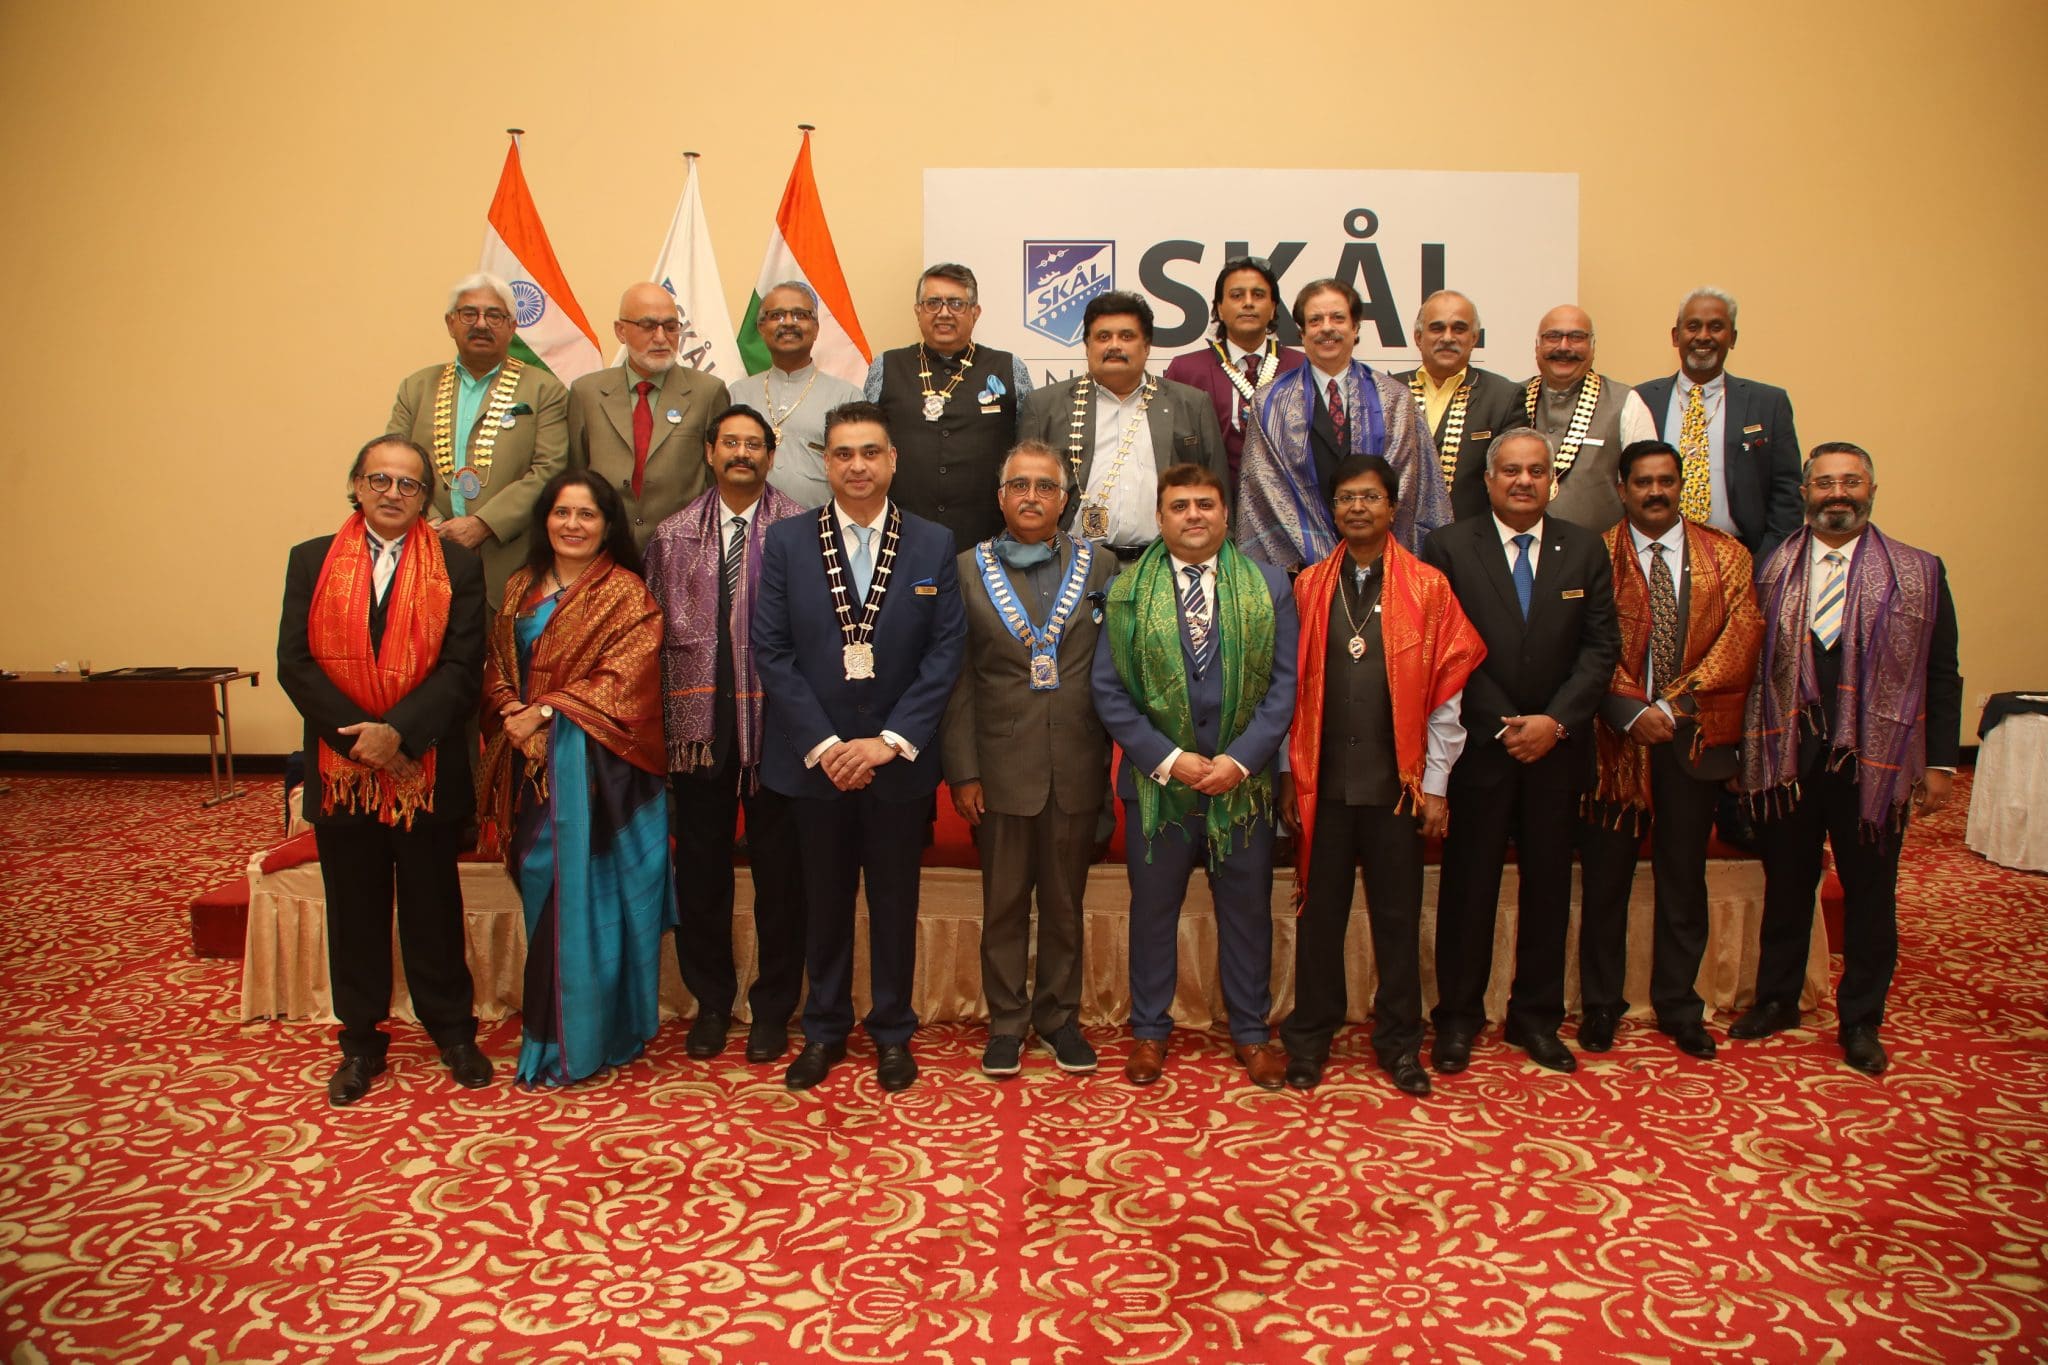 Skal International India elects new Leadership team to ...